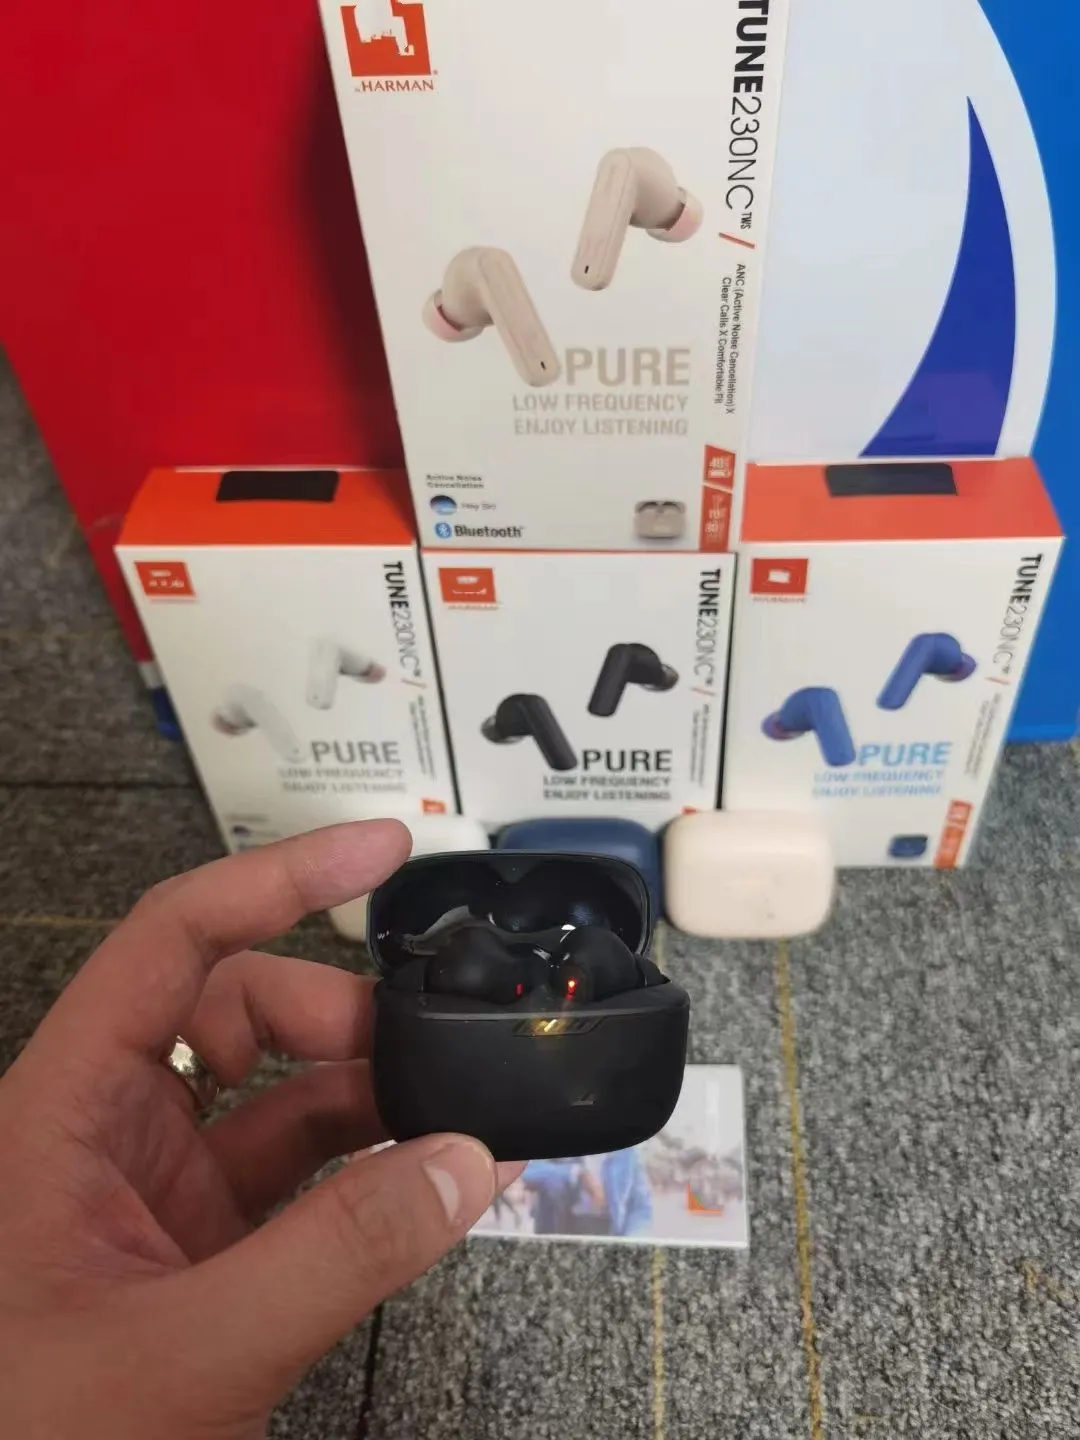 T230NC Wireless Earbuds True Wireless Earphone Clear Call Comfortable Fit Pure Low Frequency Enjoy Listening Touch Control Auto Pairing Bluetooth Headphone